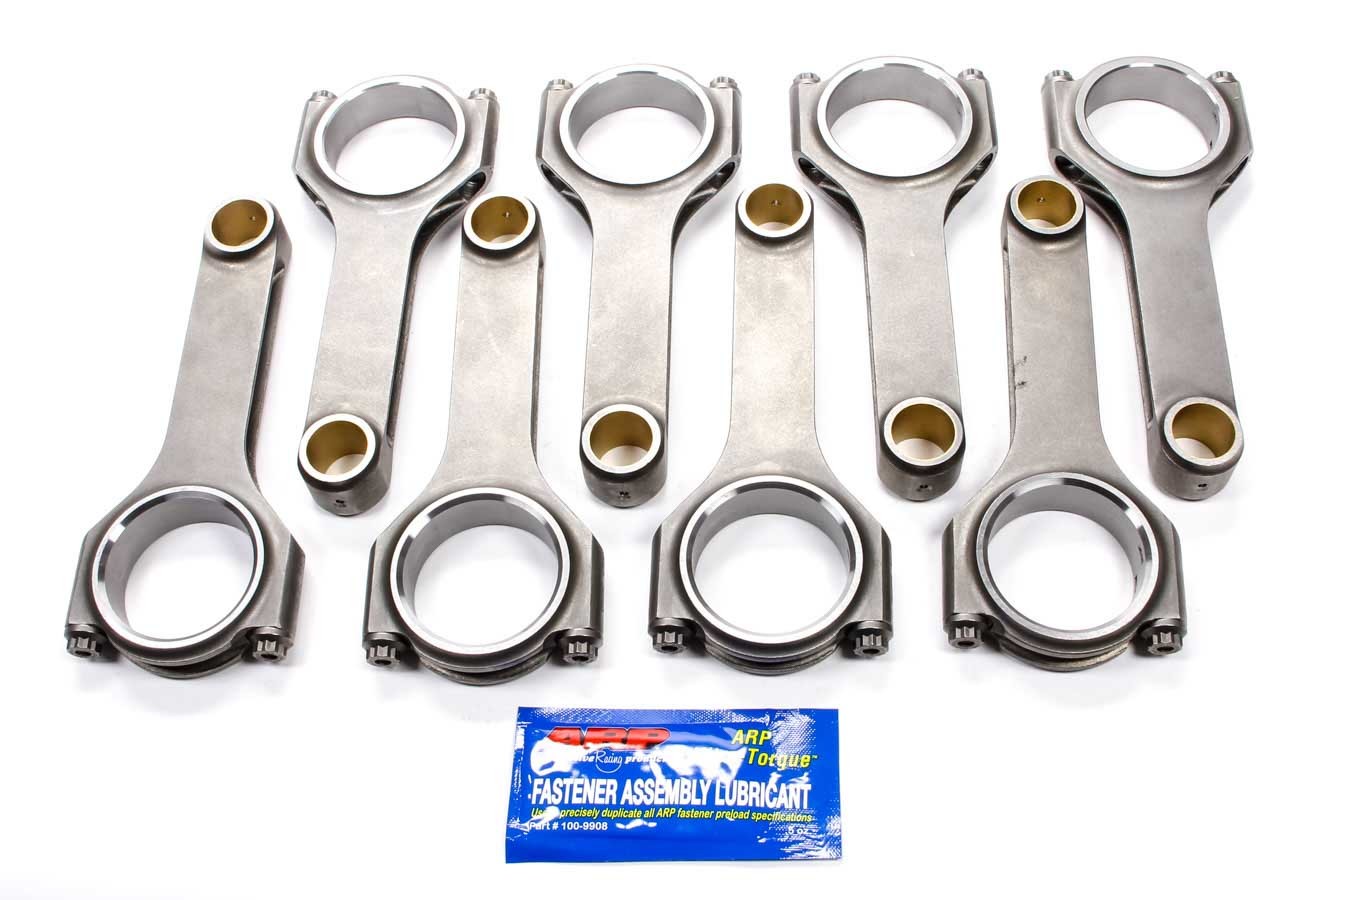 Scat 2-350-6000-2100-S - Connecting Rod, Standard Weight Stroker, H Beam, 6.000 in Long, Bushed, 7/16 in Cap Screws, ARP8740, Forged Steel, Small Block Chevy, Set of 8